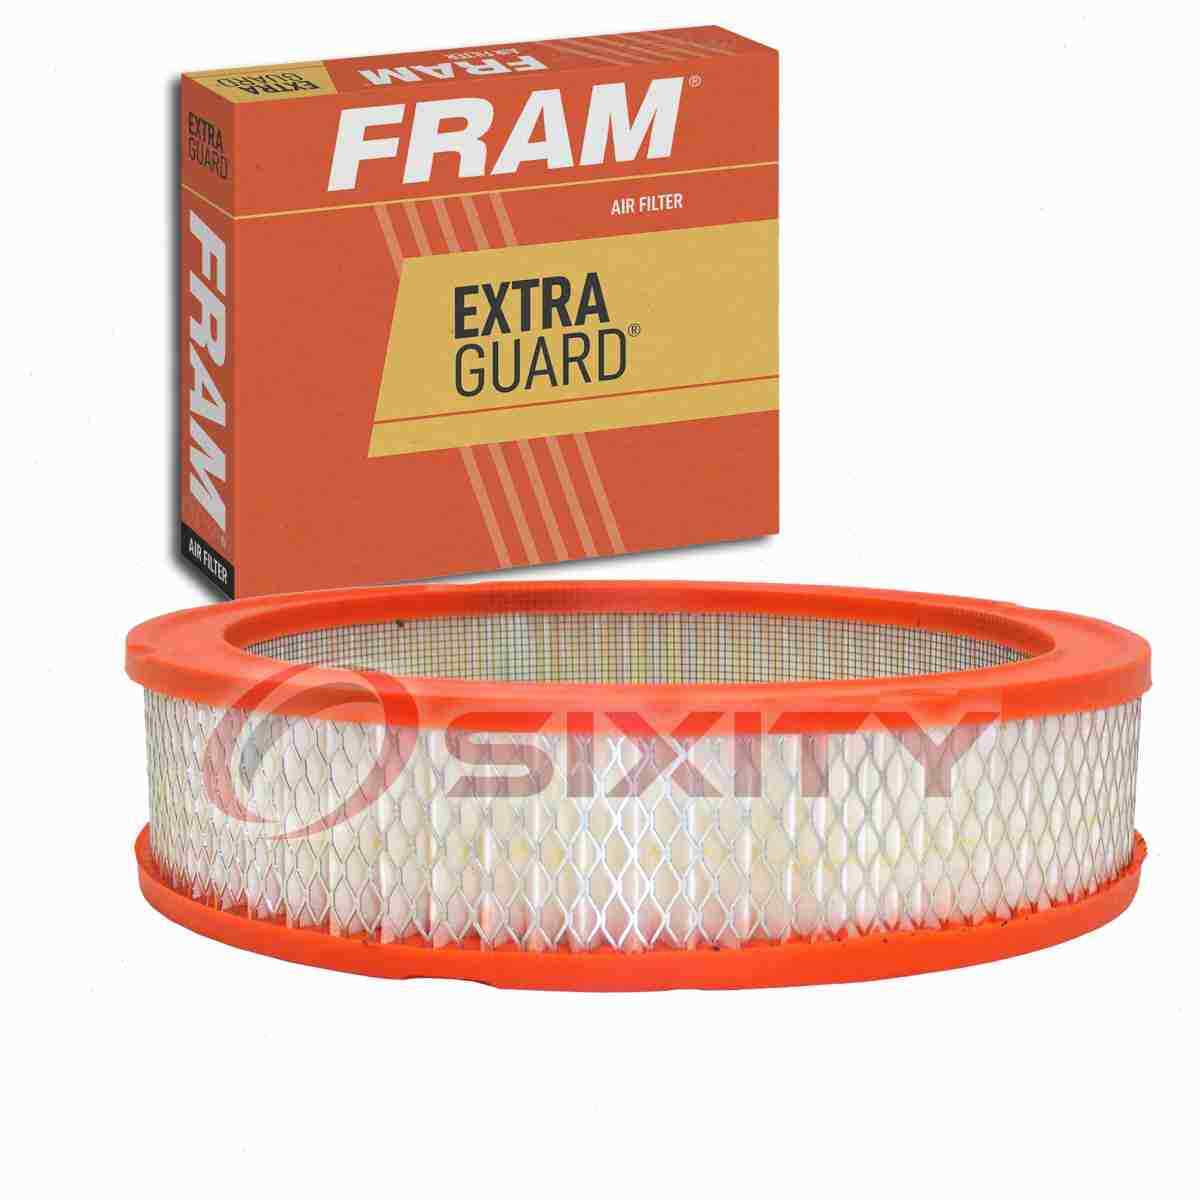 FRAM Extra Guard Air Filter for 1979 Dodge D100 Intake Inlet Manifold Fuel cl